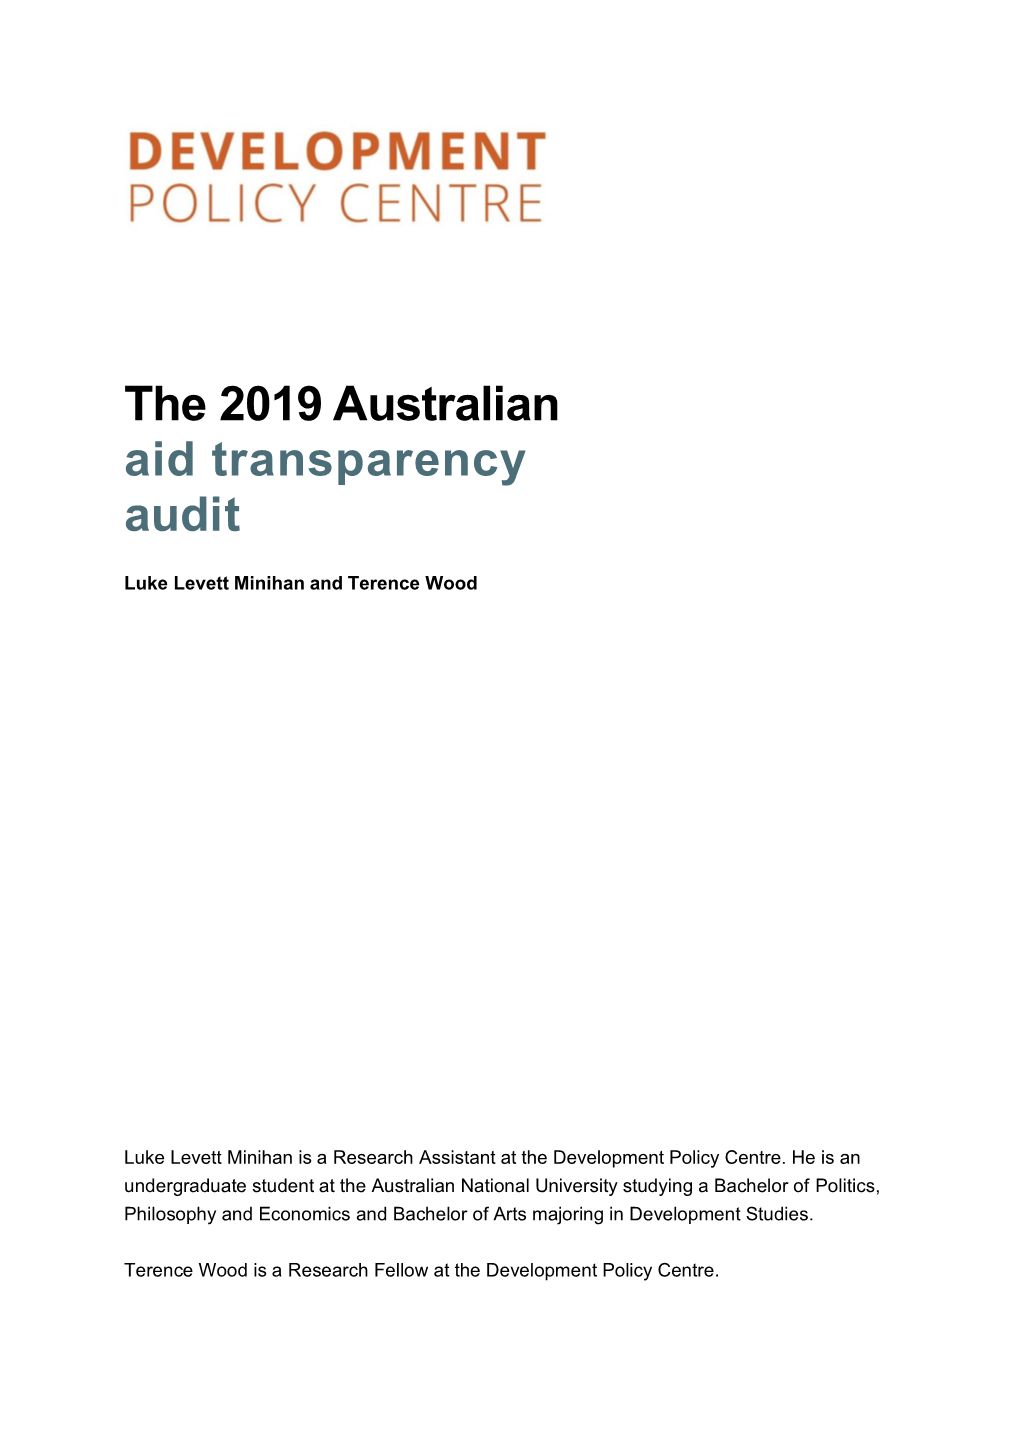 The 2019 Australian Aid Transparency Audit (Report)